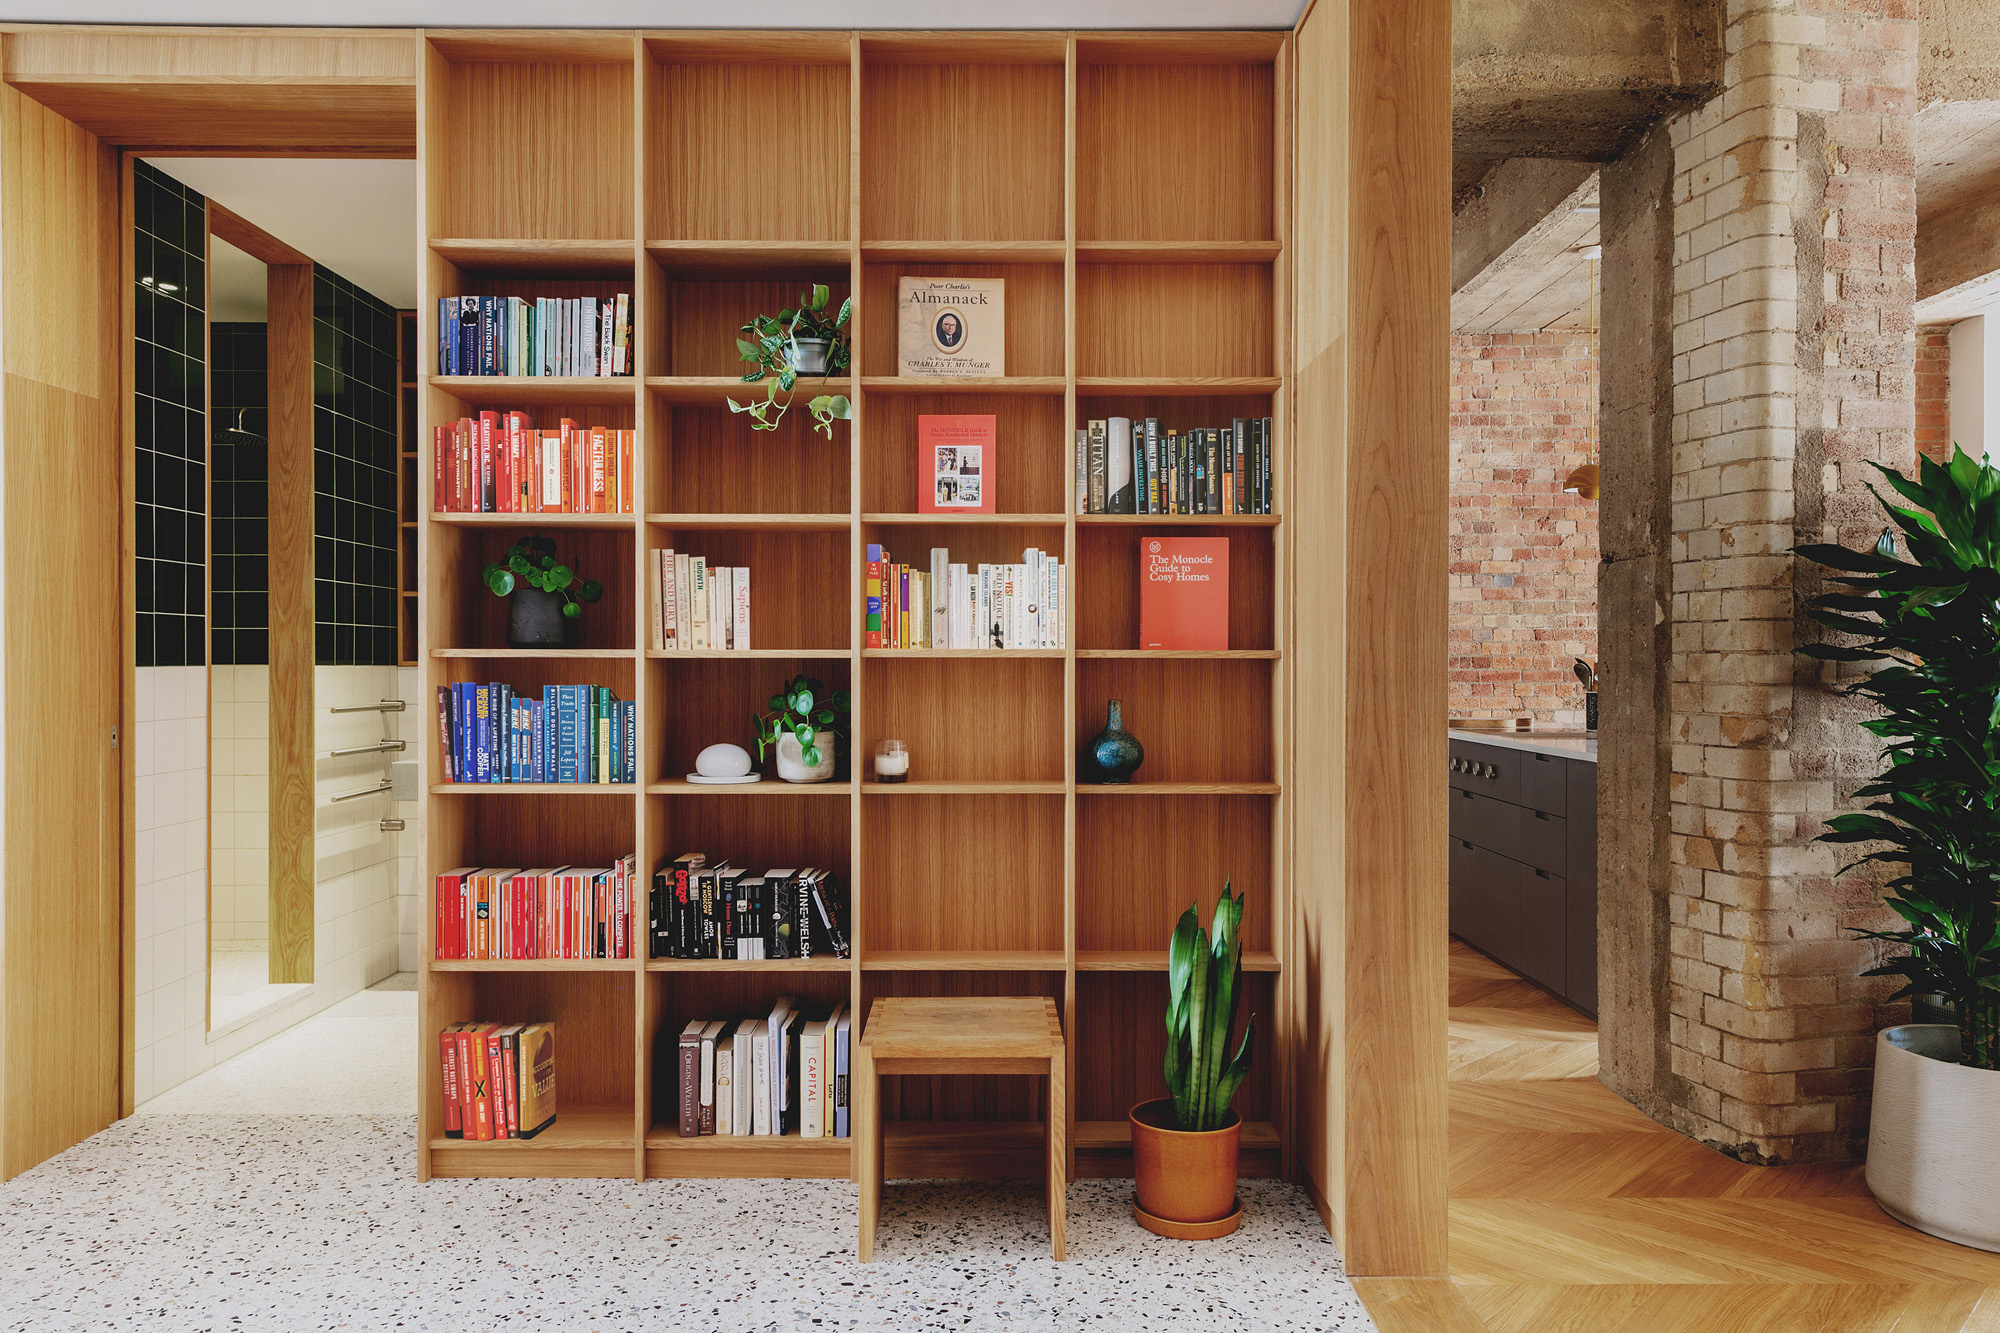 Bookcase at St John Street by Emil Eve Architects